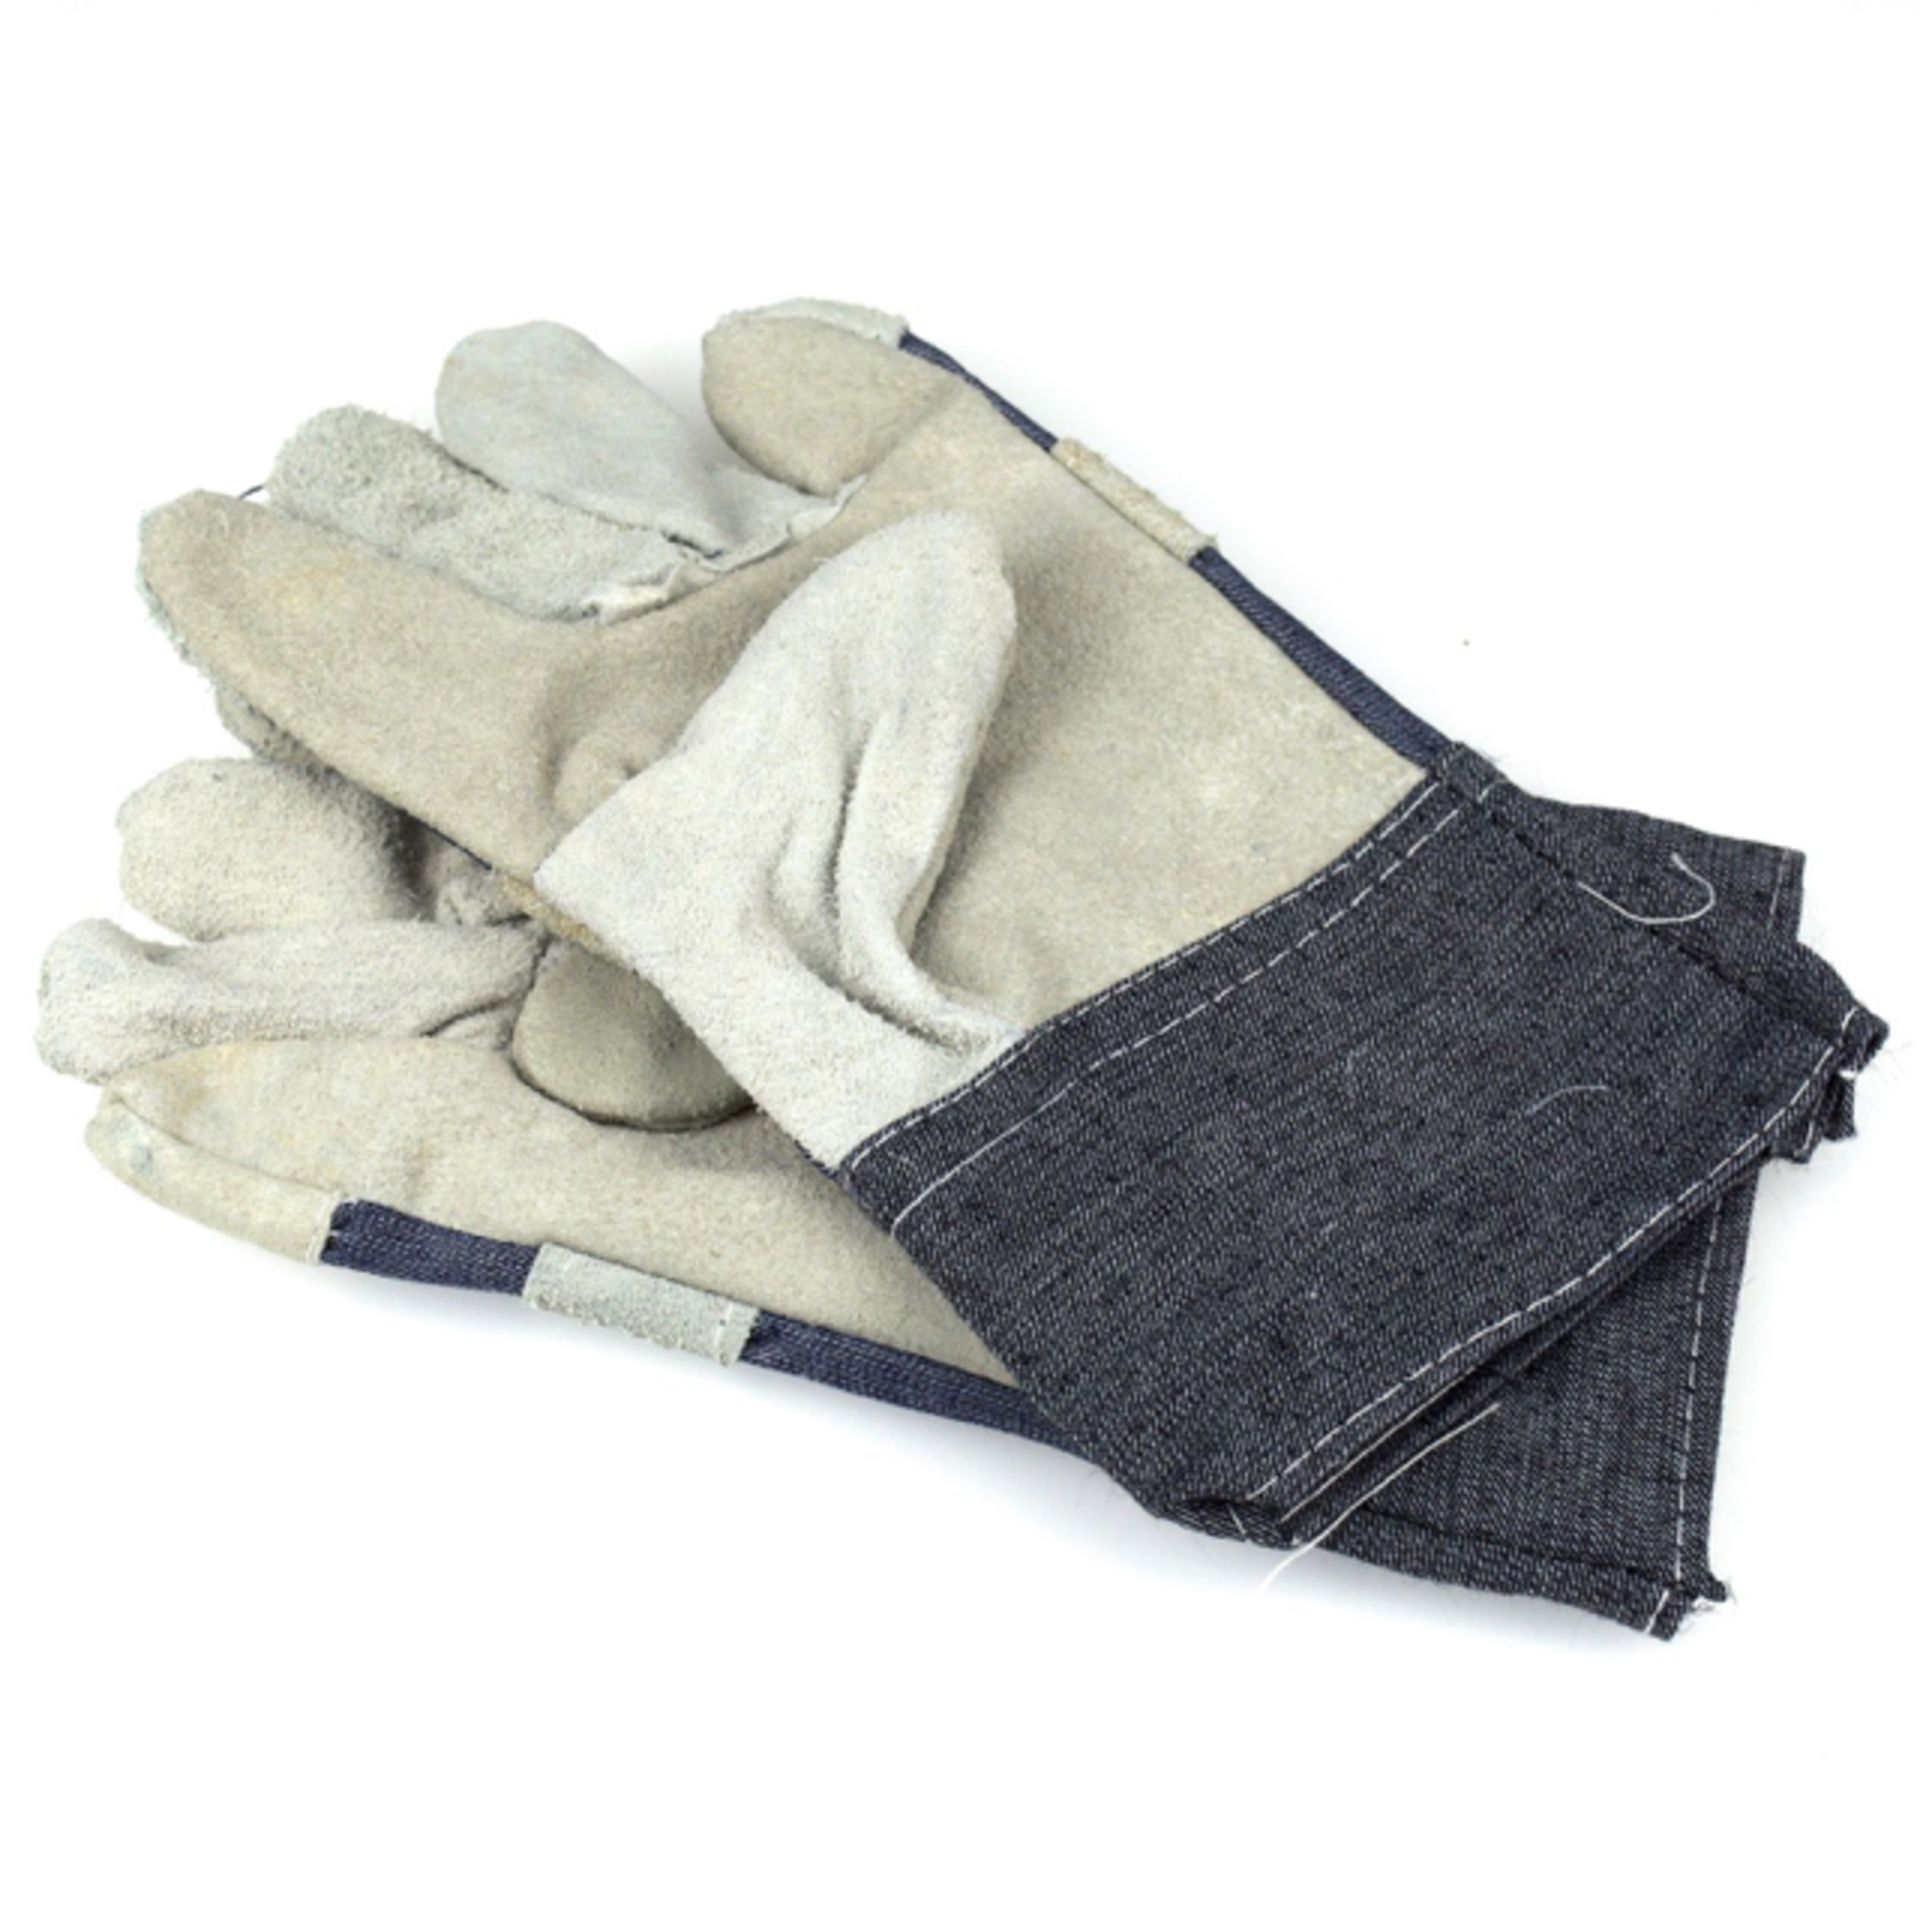 12 Pairs x NUTEX Rigger Gloves - One Size - With Suede Cowhide Leather Palm RRP Â£59.88 Buyer can - Image 3 of 3